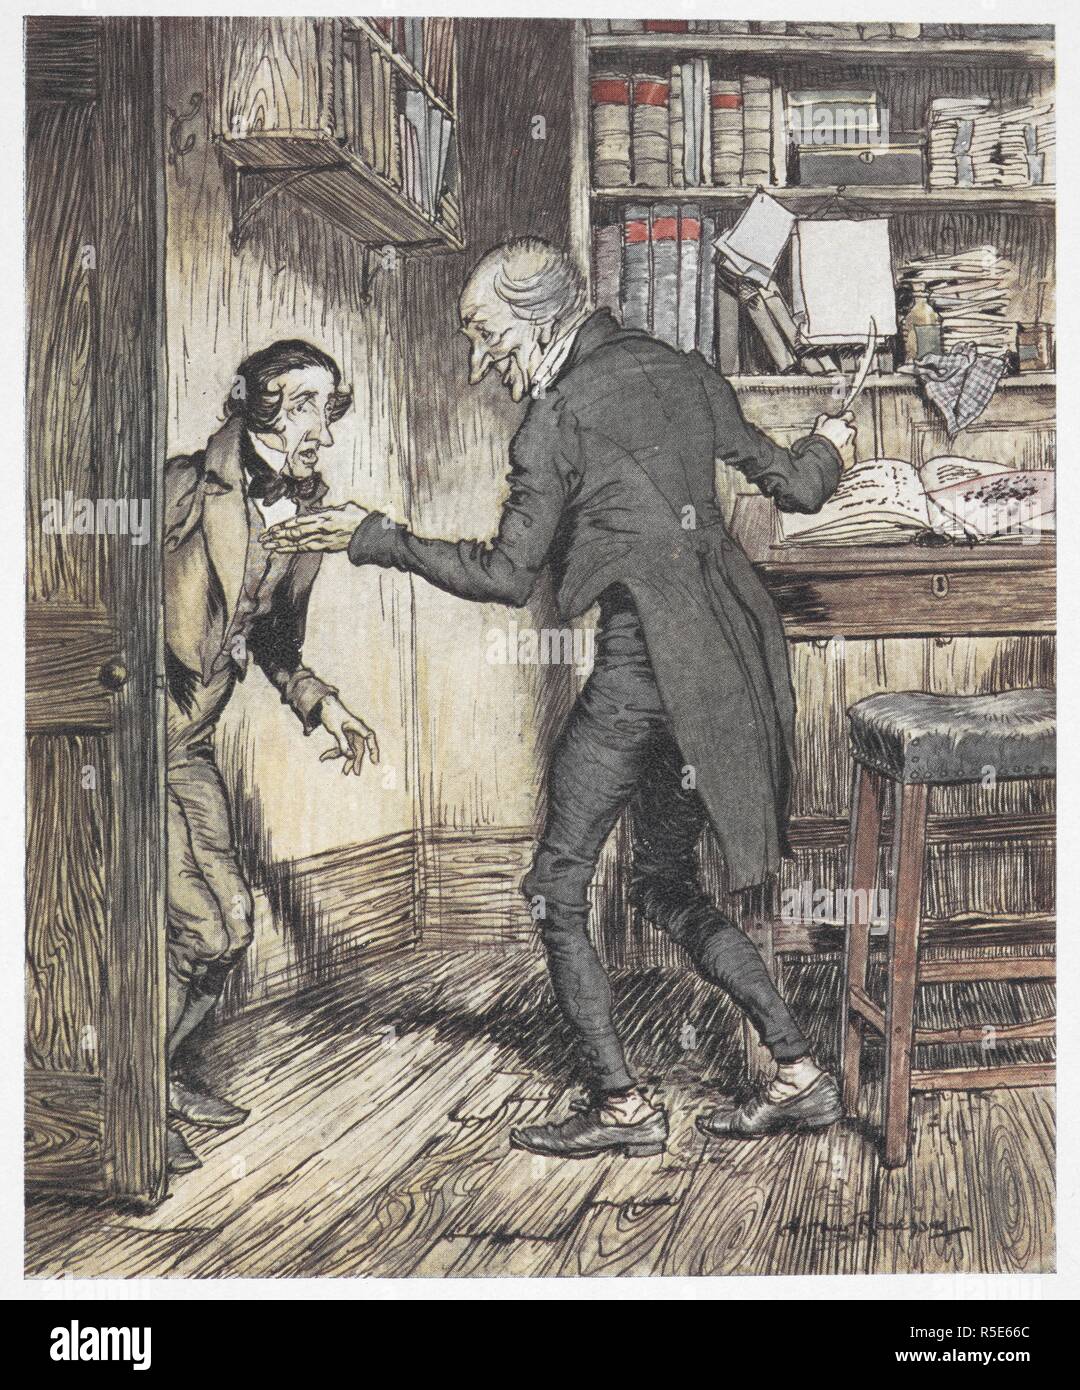 Scrooge writing in his office as another man enters. A Christmas Carol ... Illustrated by Arthur Rackham. London; J. B. Lippincott Co. Philadelphia : Wiiliam Heinemann, 1915. 'Now, I'll tell you what, my friend,' said Scrooge. 'I am not going to stand this sort of thing any longer.'. Source: 012622.g.37. opposite page 146. Author: RACKHAM, ARTHUR. DICKENS, CHARLES. Stock Photo